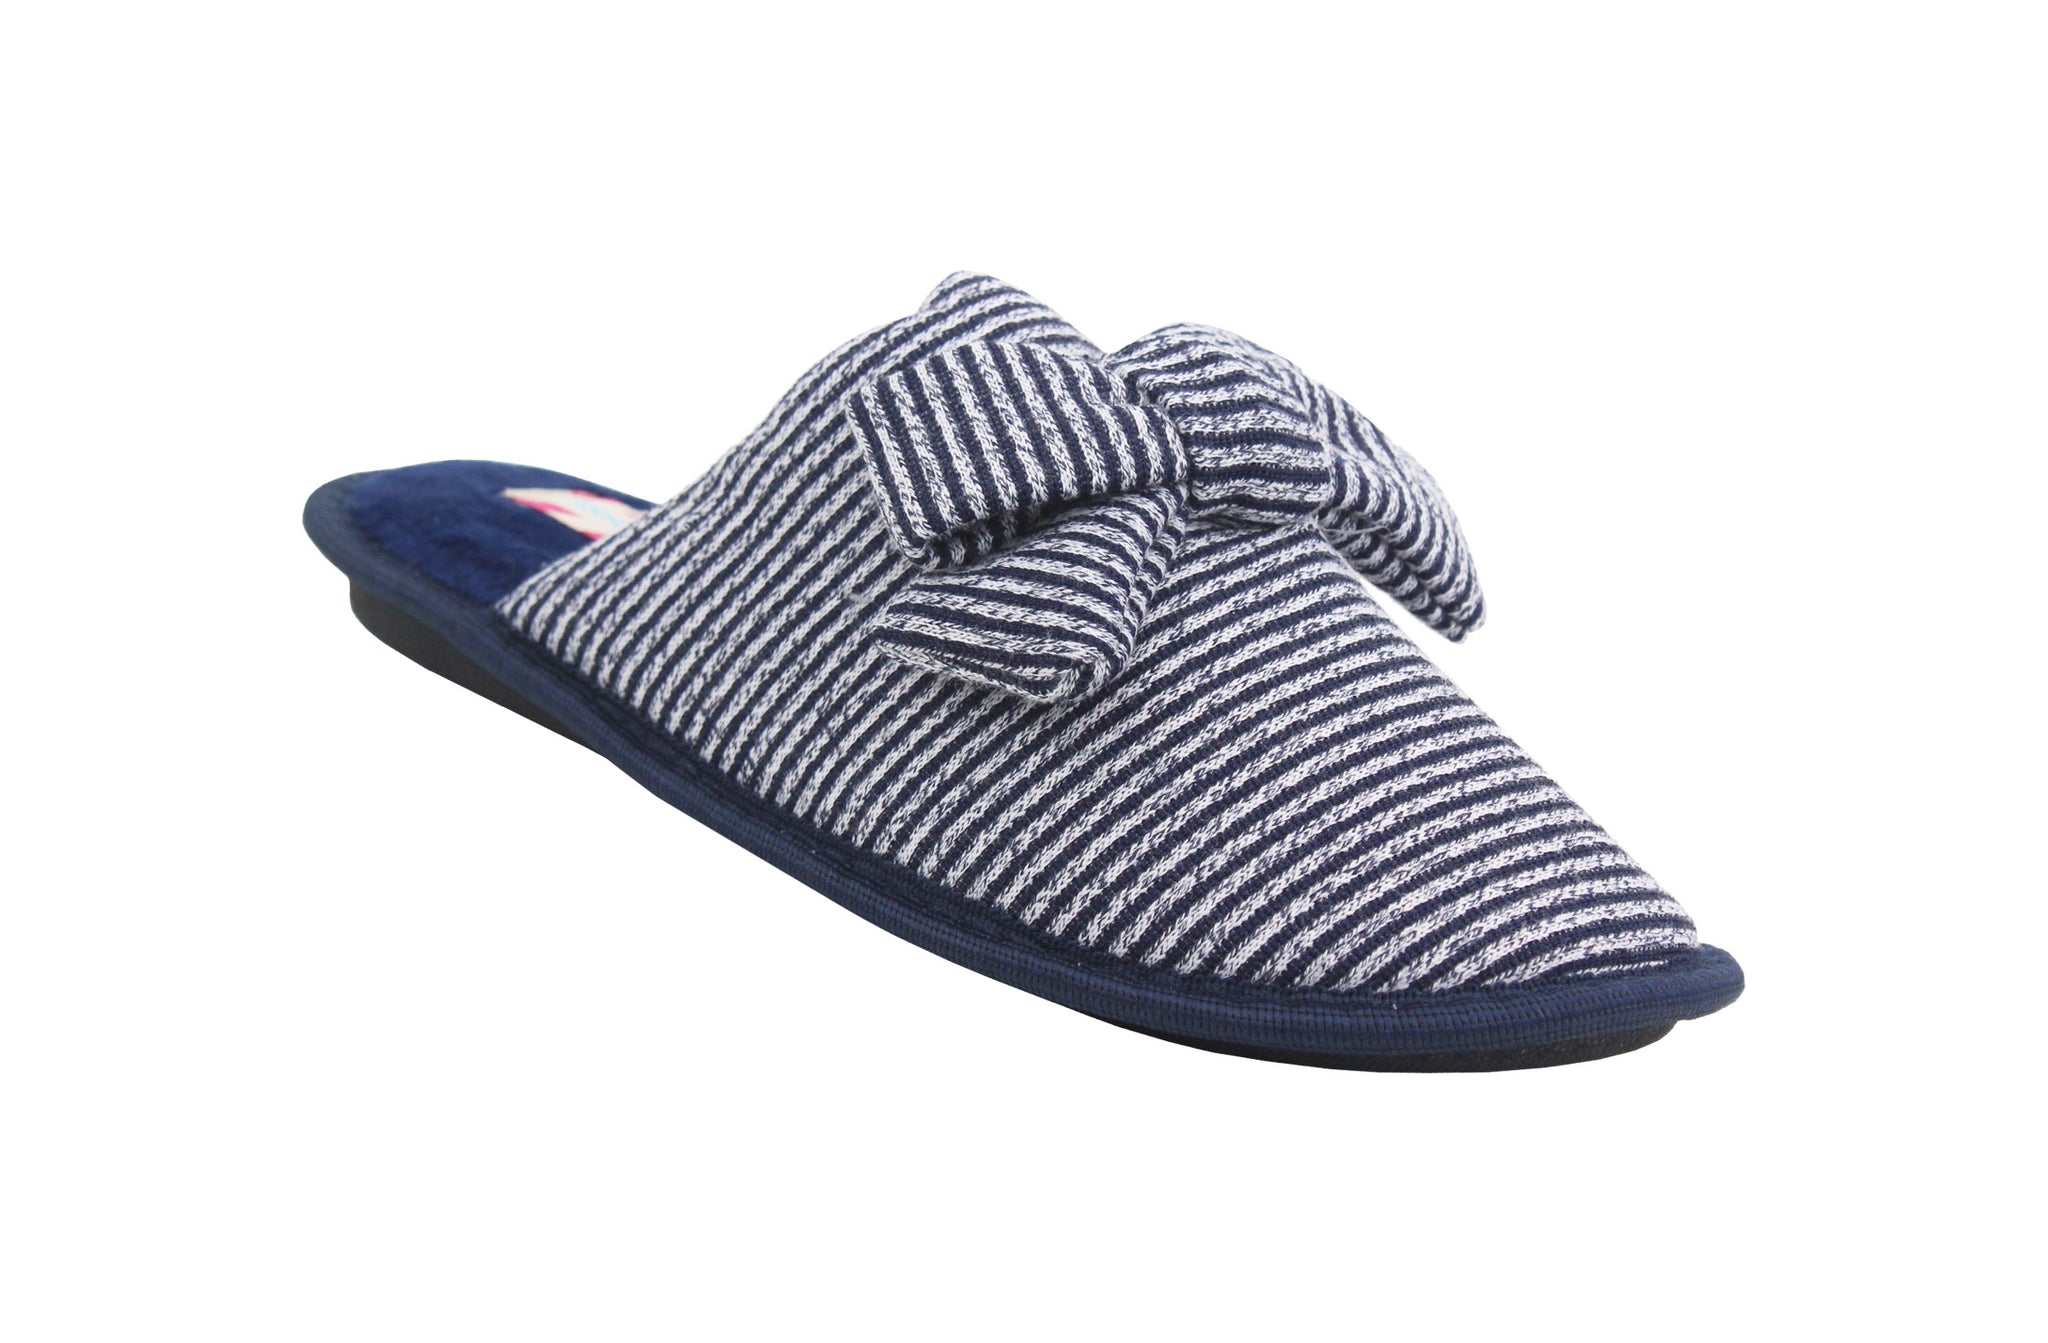 Womens Navy Bow Slip On Lightweight Warm Lined Mules Slippers